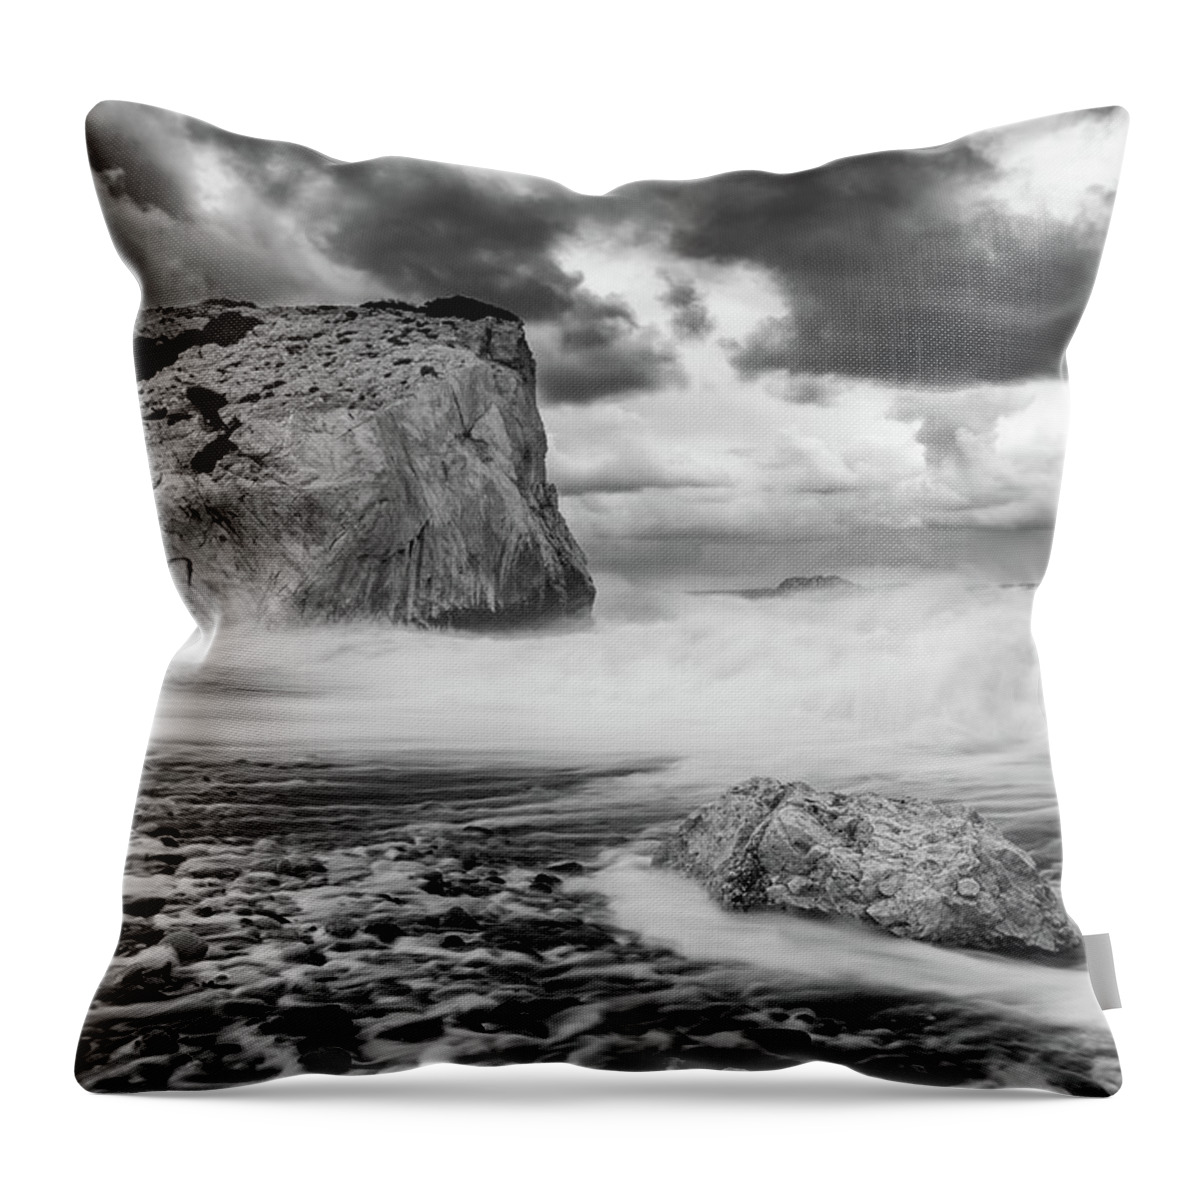 Seascape Throw Pillow featuring the photograph Seascape with windy waves during stormy weather. by Michalakis Ppalis